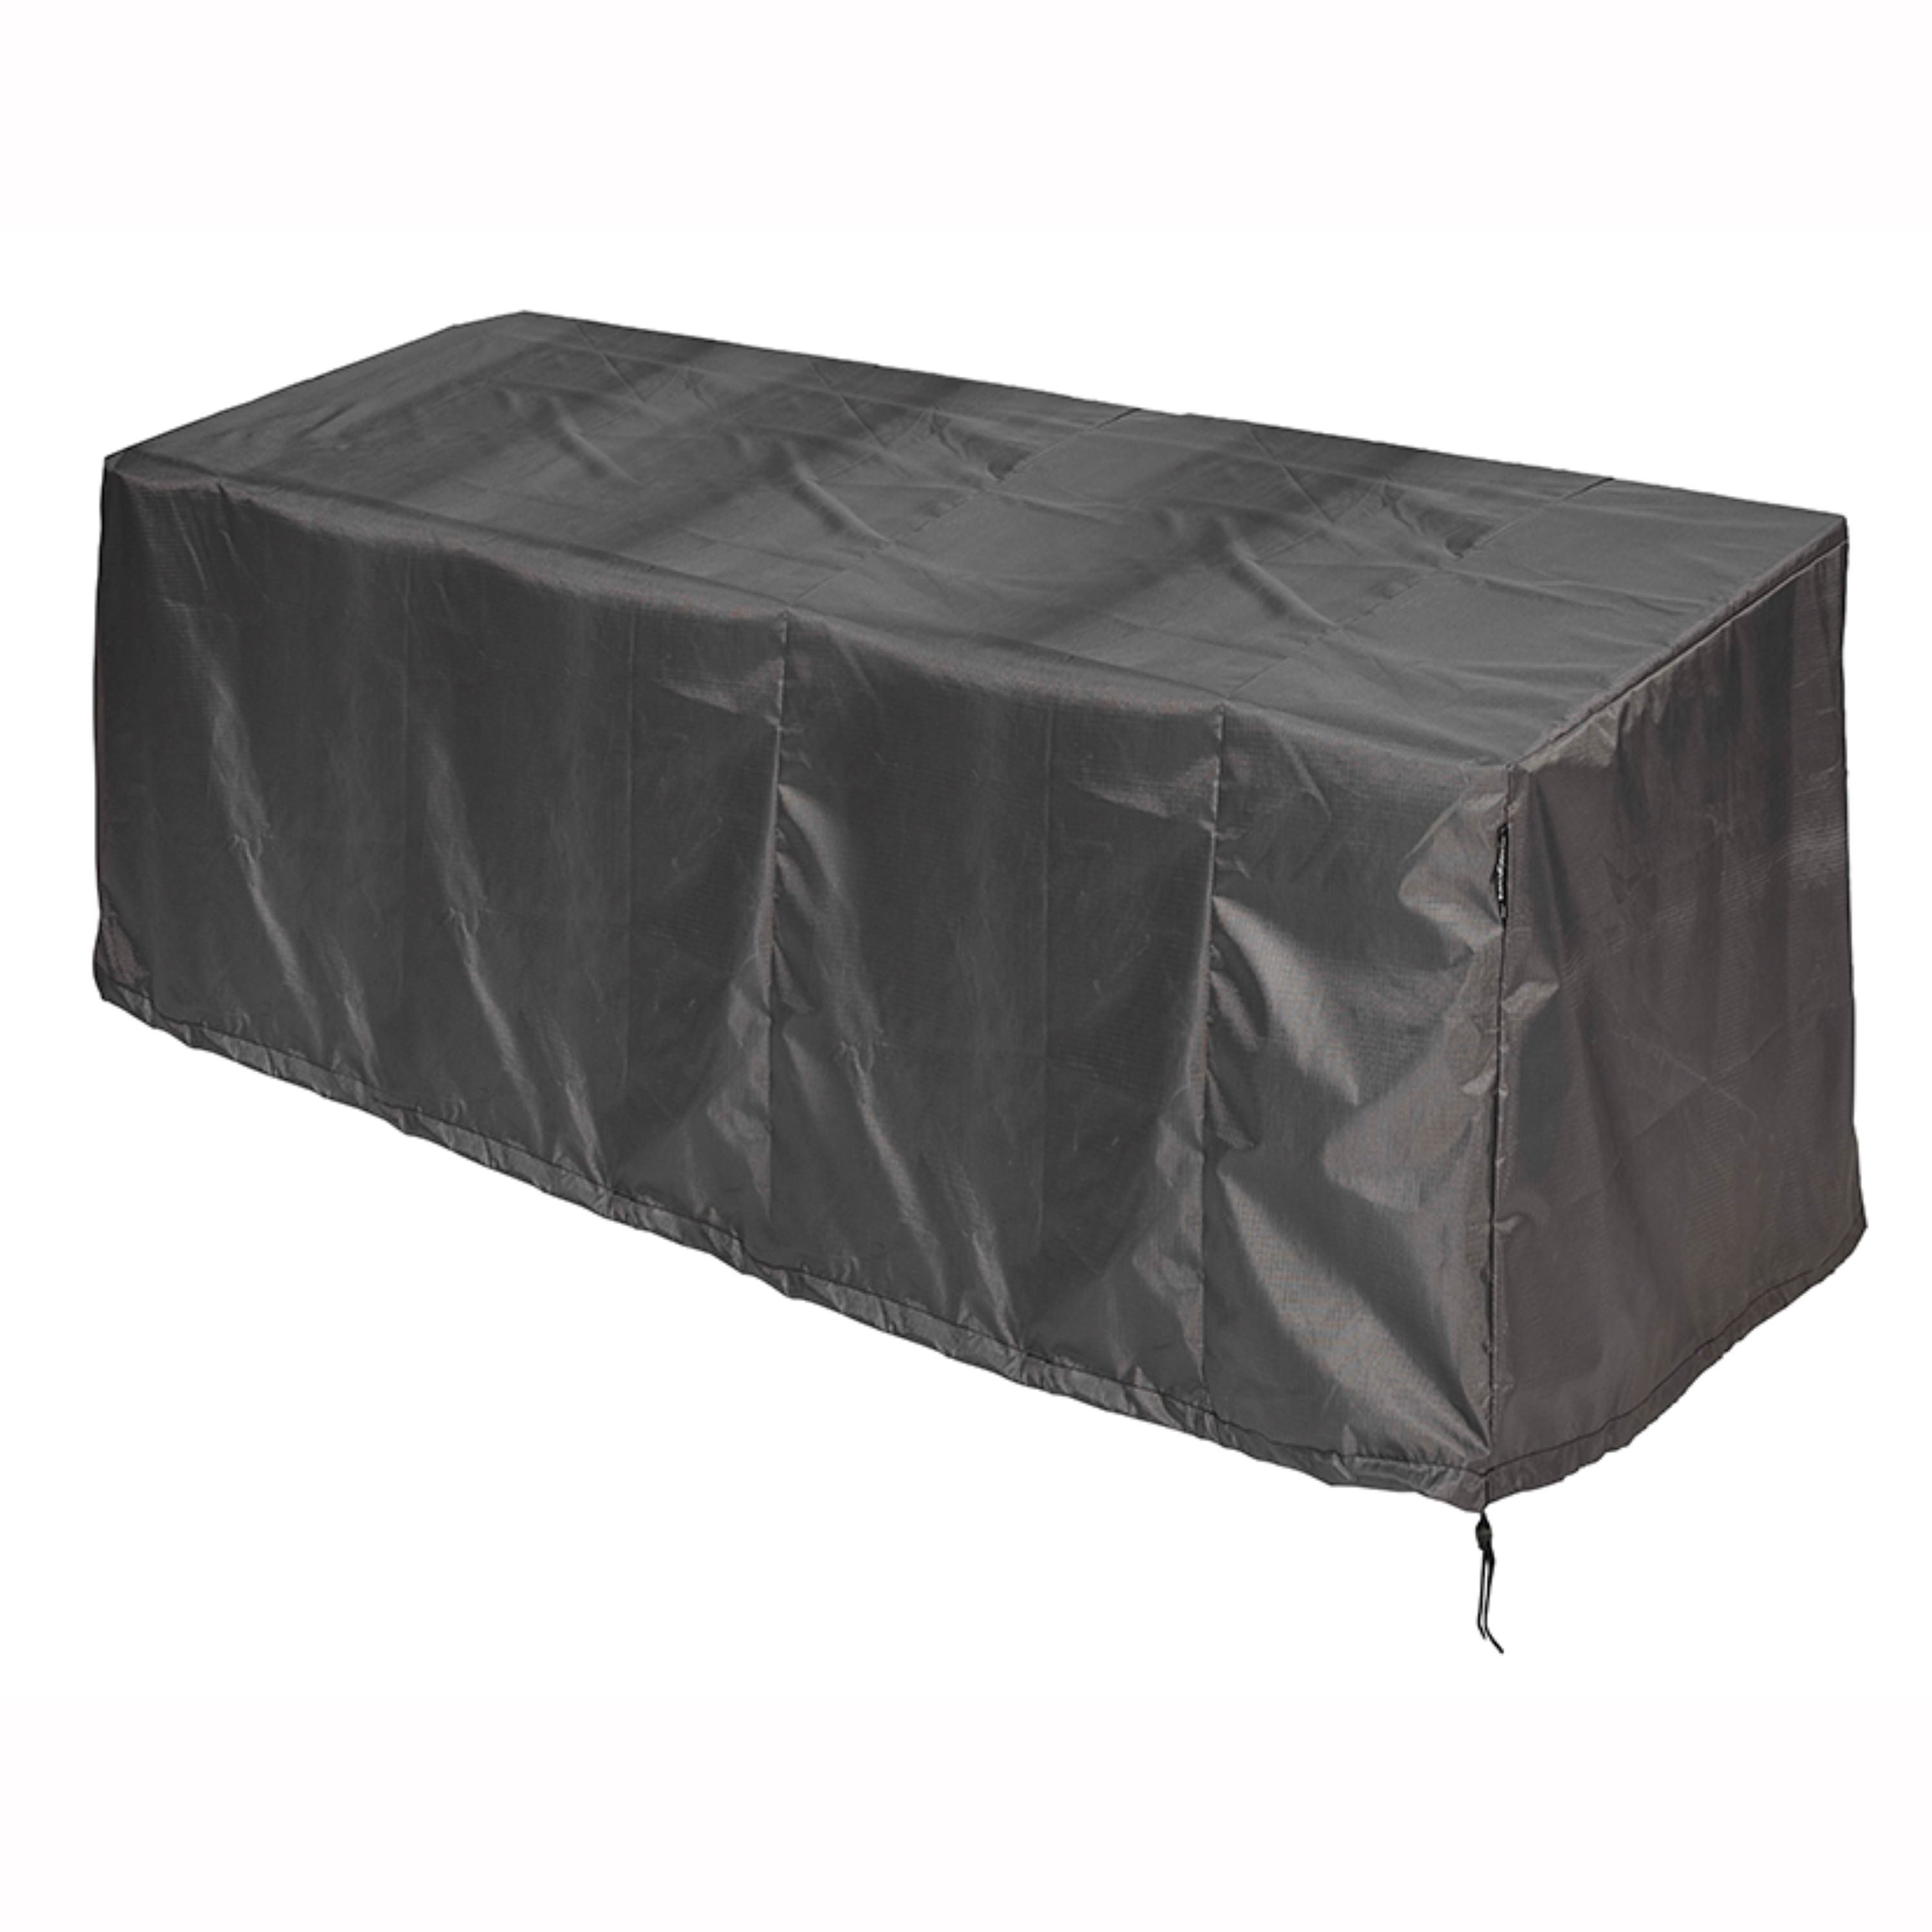 Aerocover Lounge Bench Cover